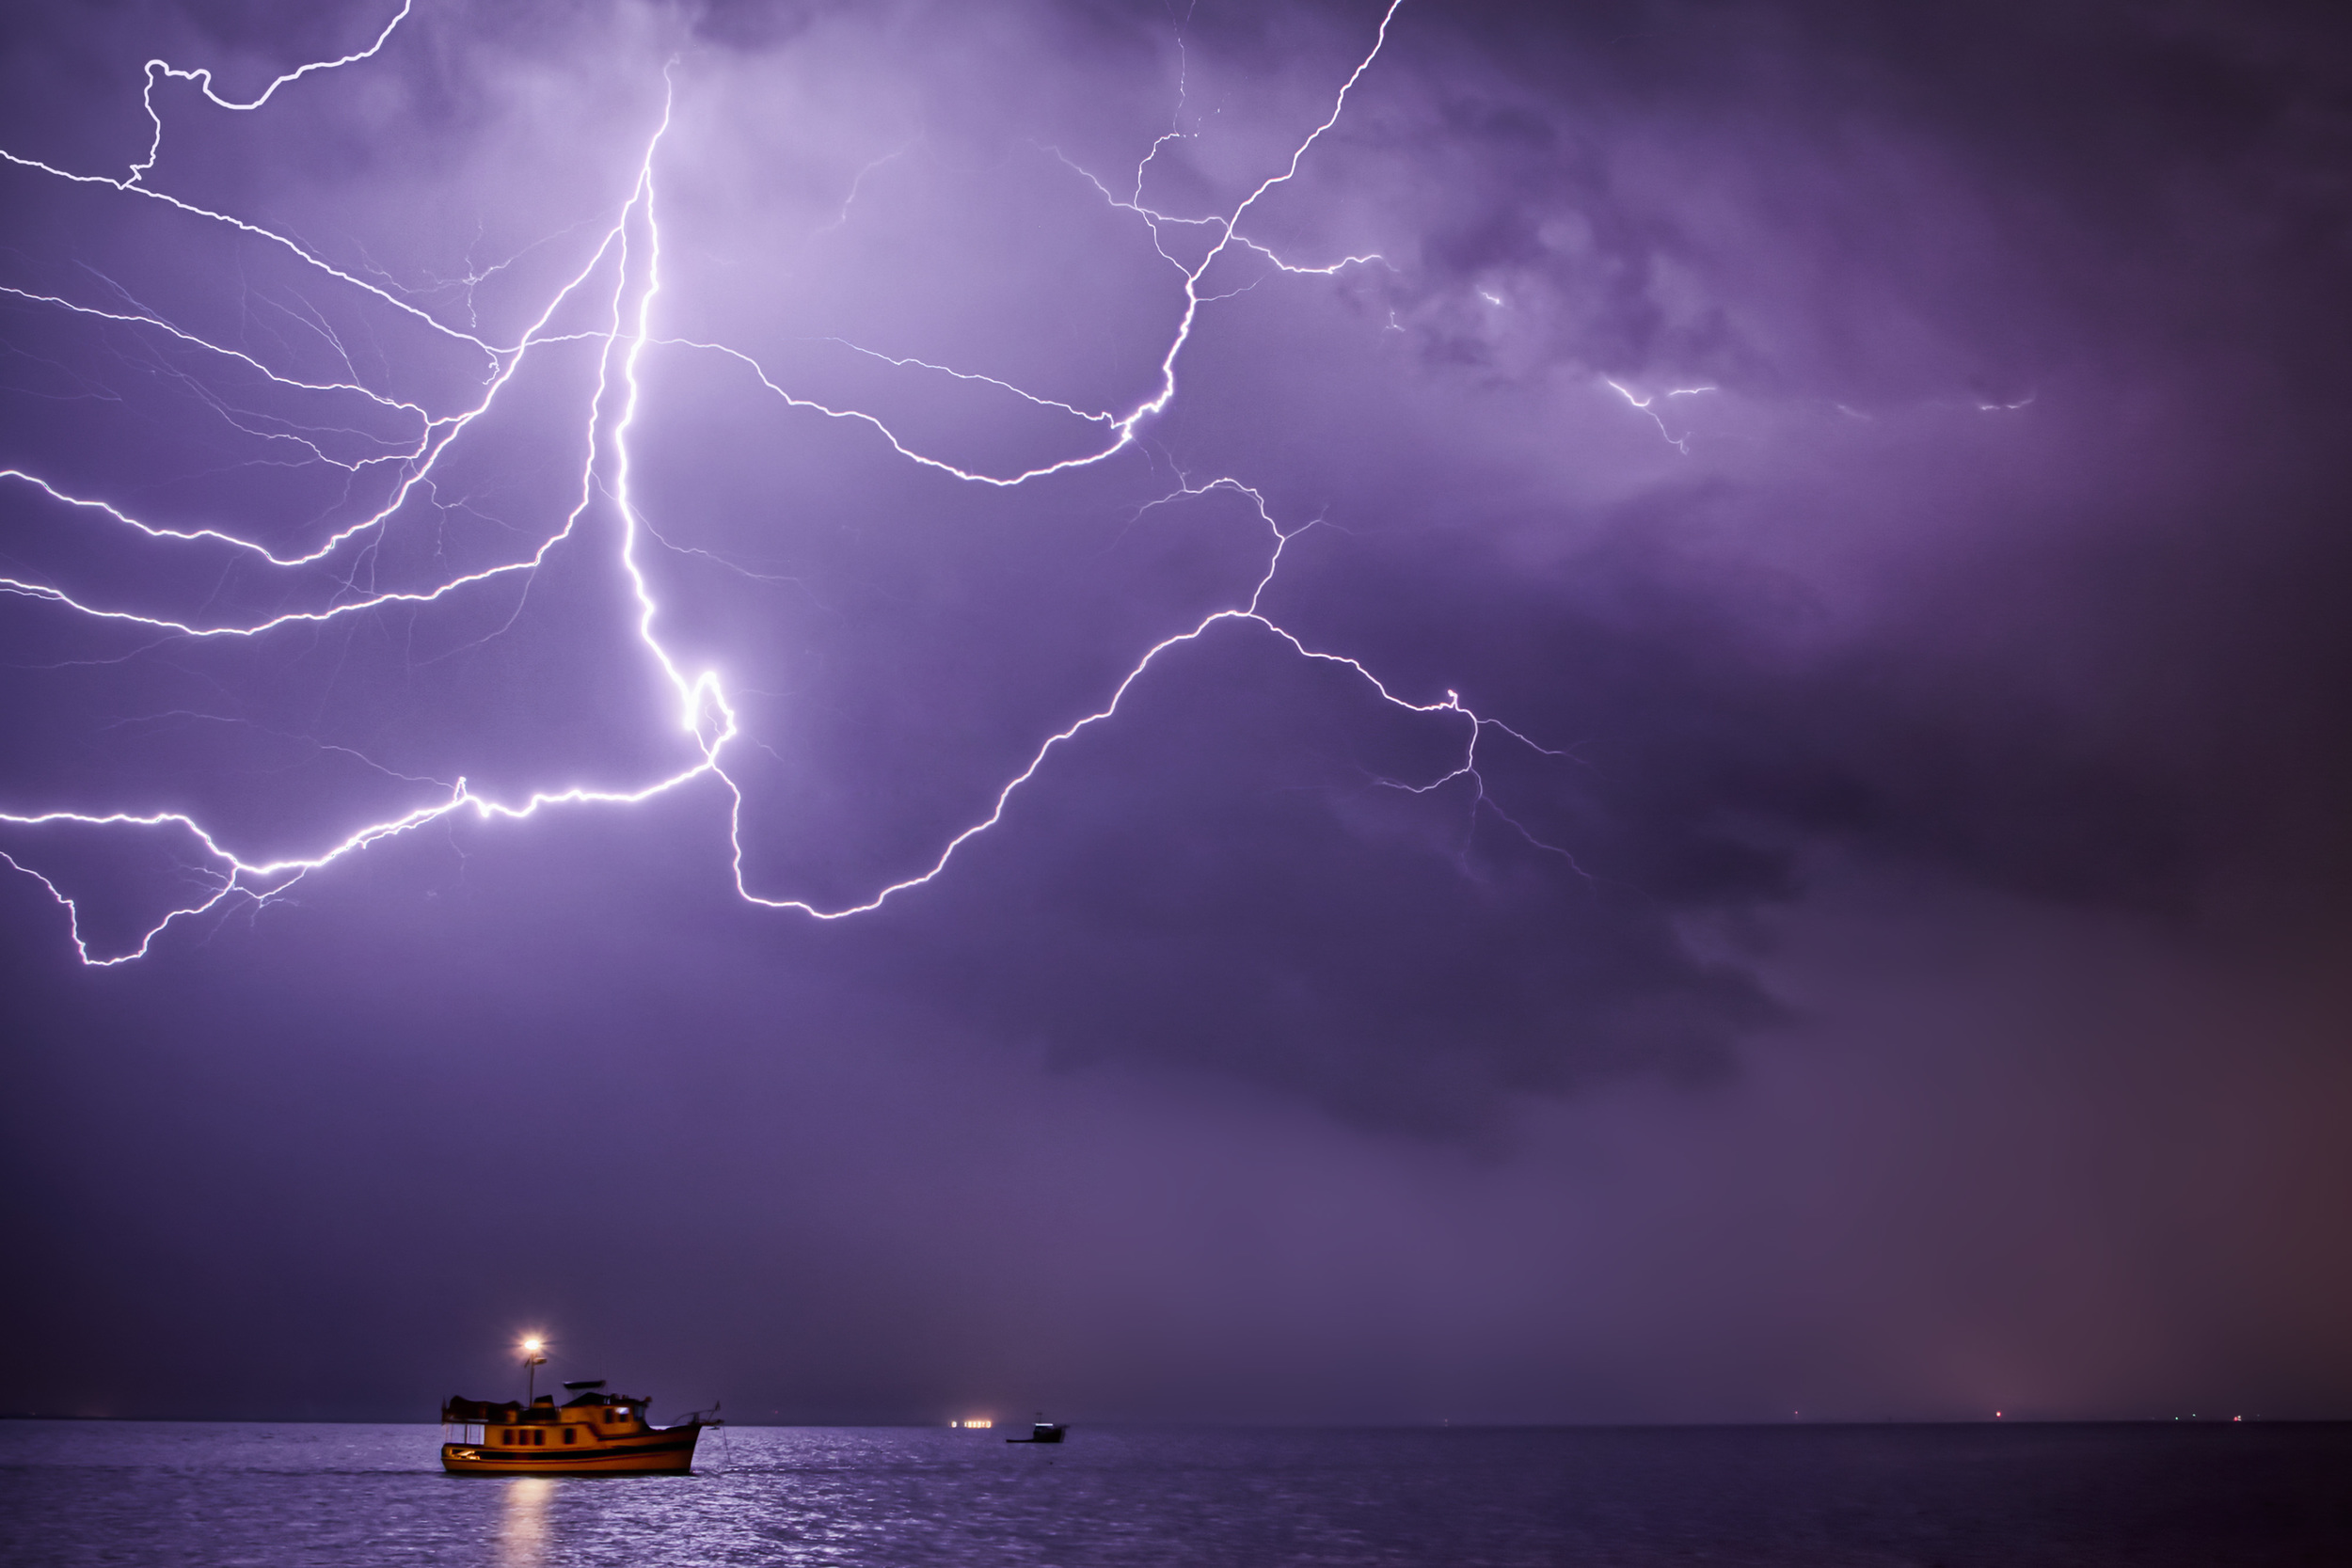   Cloud to cloud lightning over a boat in the Indian River, in Titusville, Florida  